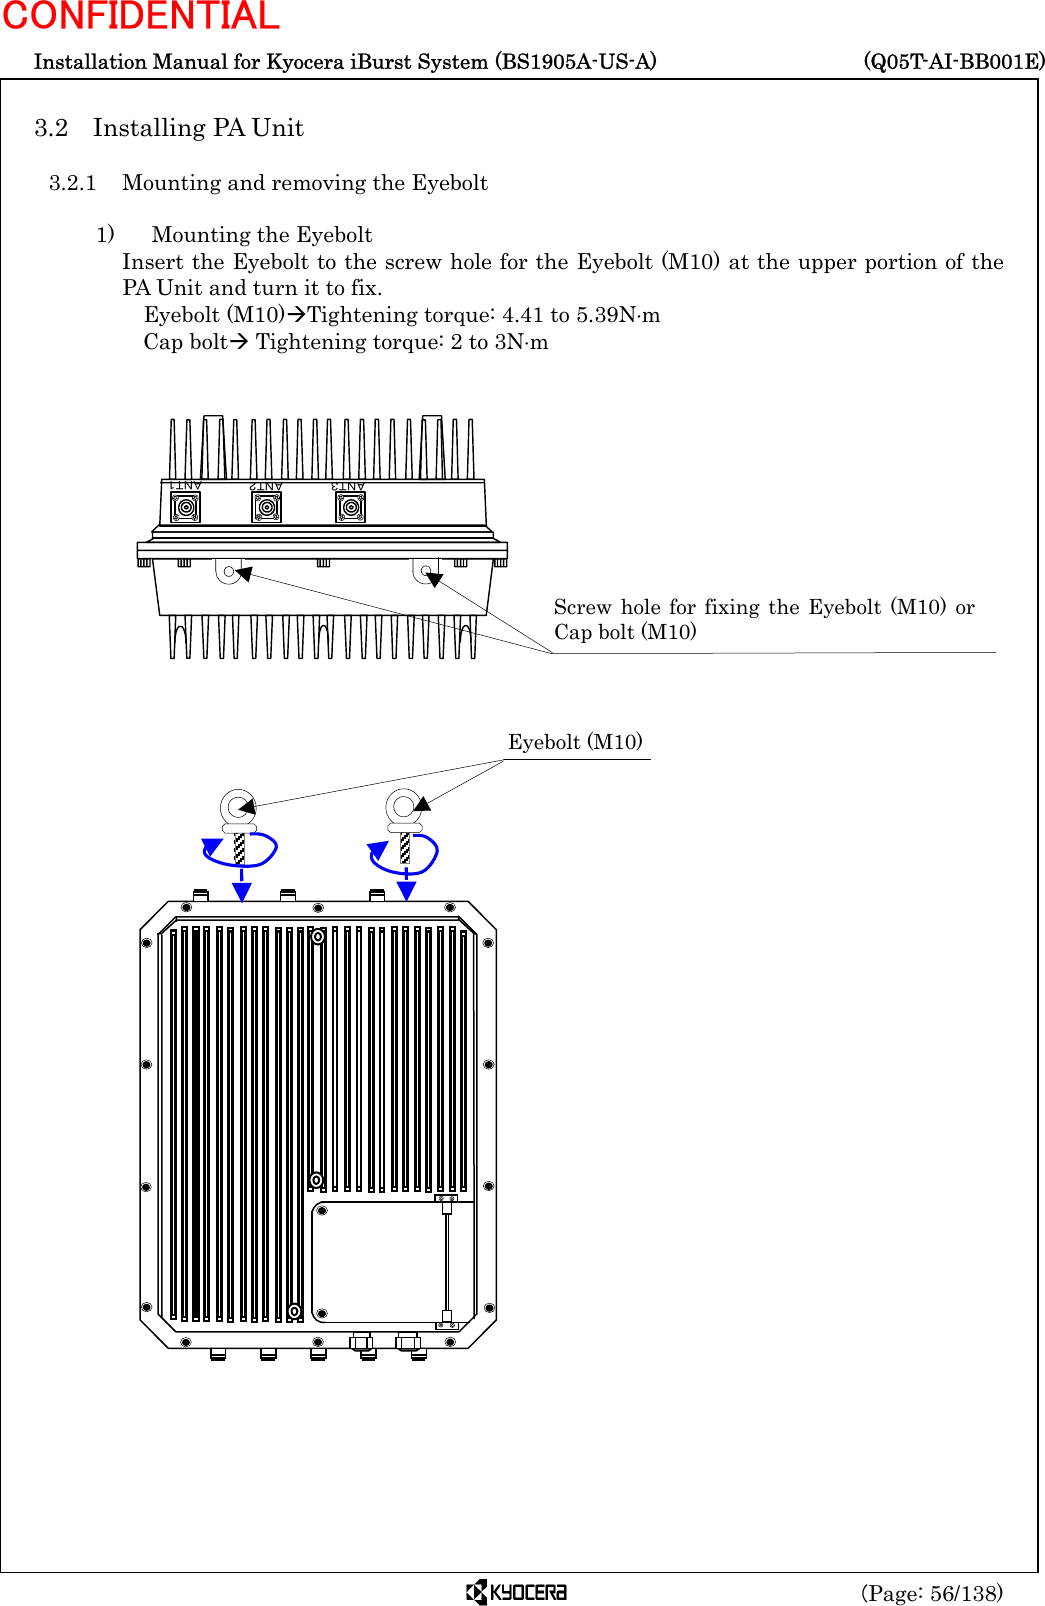  Installation Manual for Kyocera iBurst System (BS1905A-US-A)     (Q05T-AI-BB001E) (Page: 56/138) CONFIDENTIAL  3.2  Installing PA Unit    3.2.1  Mounting and removing the Eyebolt    1)    Mounting the Eyebolt Insert the Eyebolt to the screw hole for the Eyebolt (M10) at the upper portion of the PA Unit and turn it to fix.           Eyebolt (M10)ÆTightening torque: 4.41 to 5.39N⋅m Cap boltÆ Tightening torque: 2 to 3N⋅m                                           Screw hole for fixing the Eyebolt (M10) orCap bolt (M10)   ＡＮＴ１ＡＮＴ２ＡＮＴ３Eyebolt (M10) 